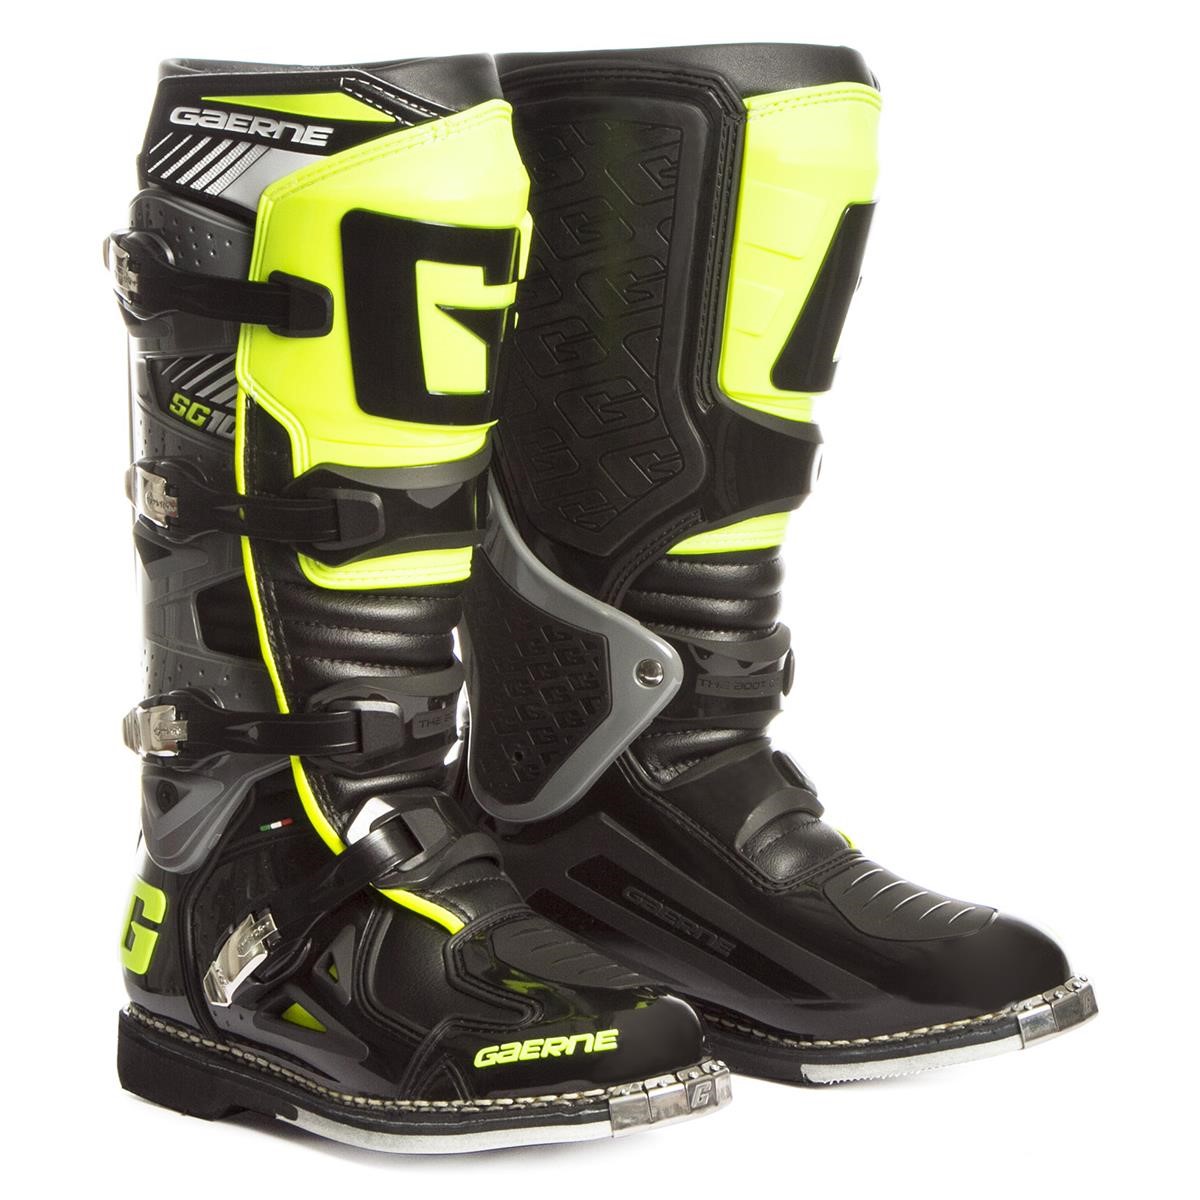 Gaerne MX Boots SG 10 Yellow